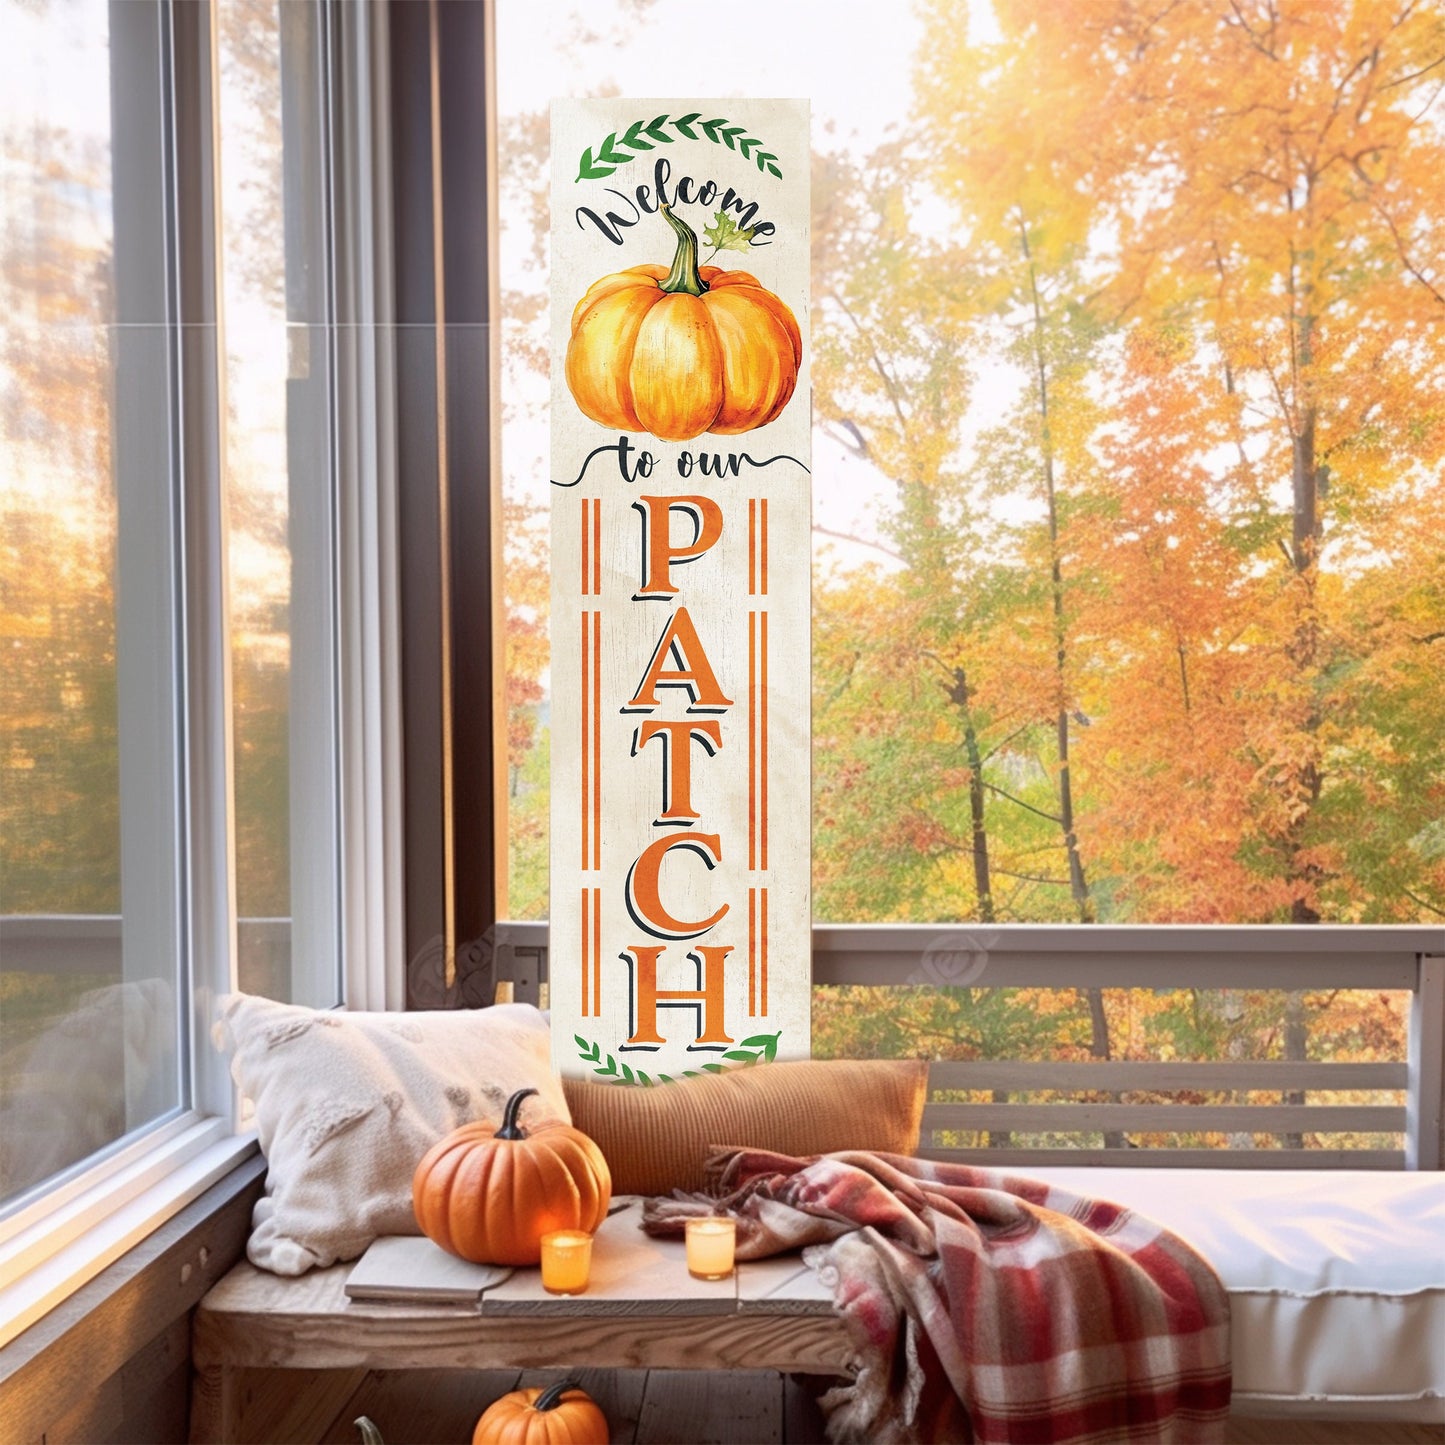 36in "Welcome to Our Patch" Fall Porch Sign - Rustic Wooden Decor for Front Door Display during Autumn Celebrations